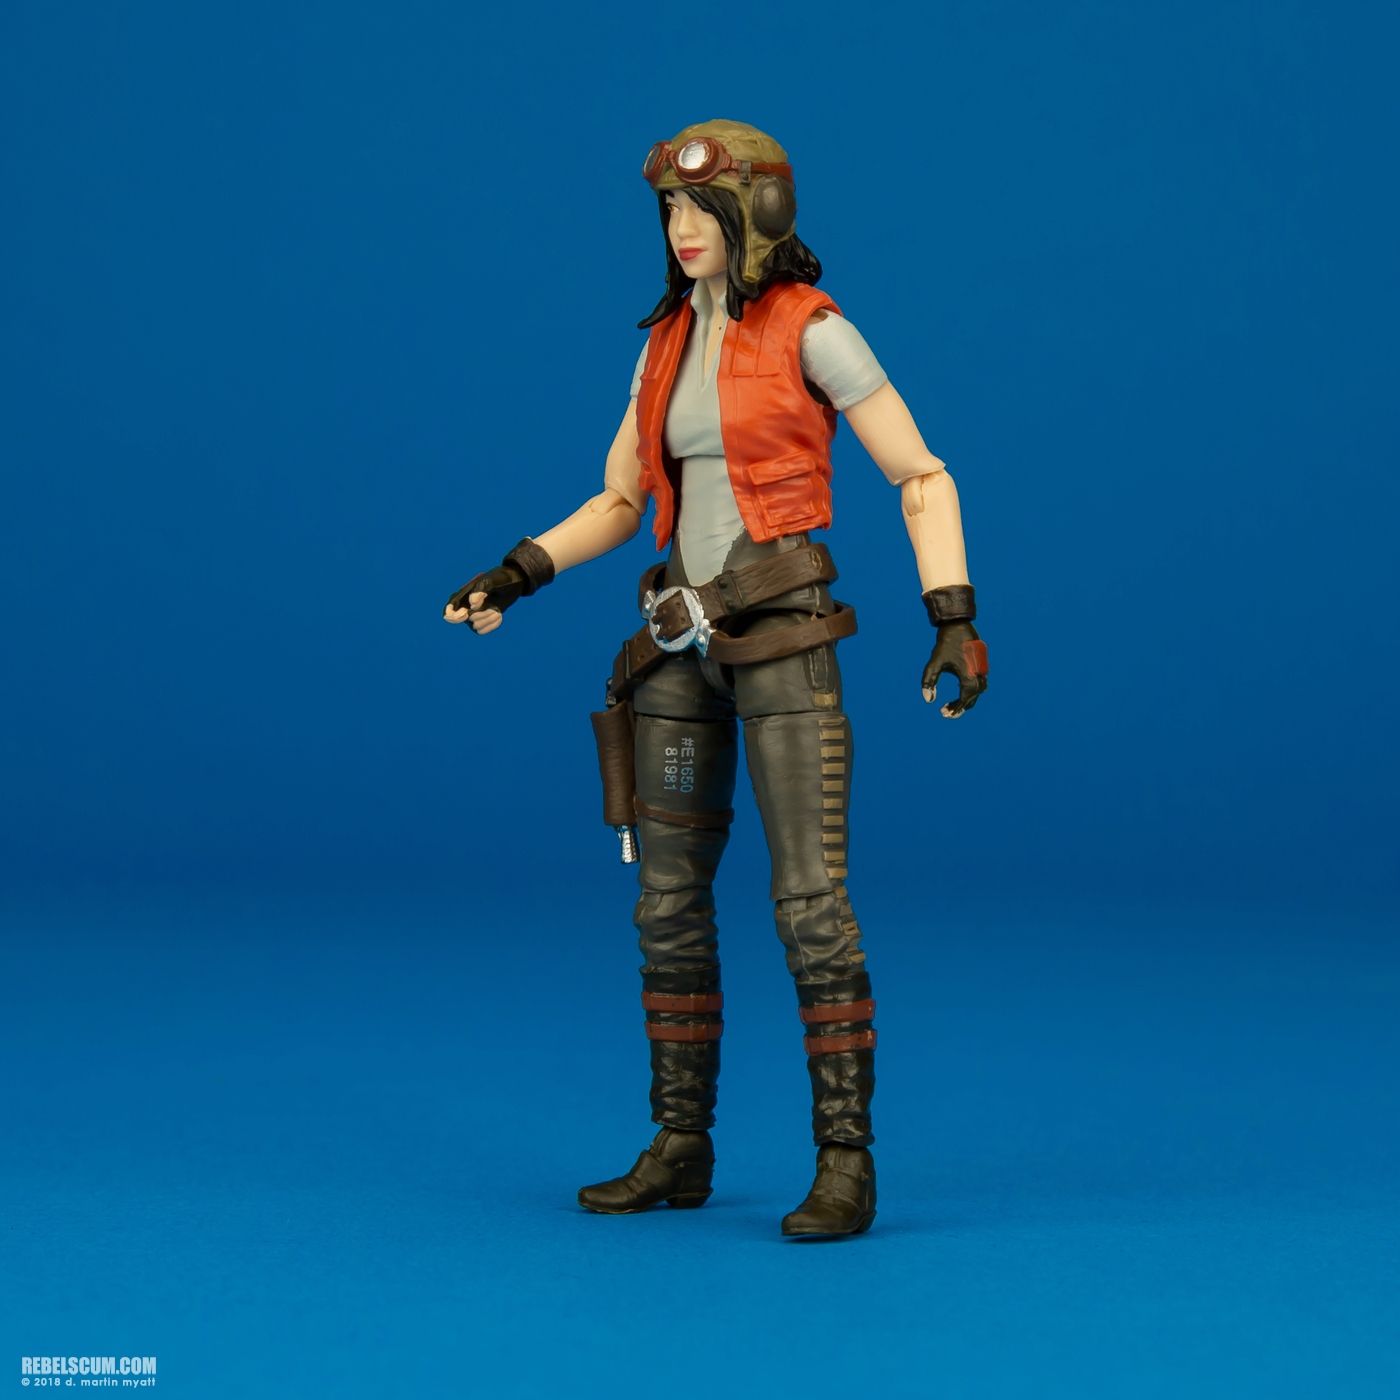 VC129-Doctor-Aphra-The-Vintage-Collection-Hasbro-007.jpg